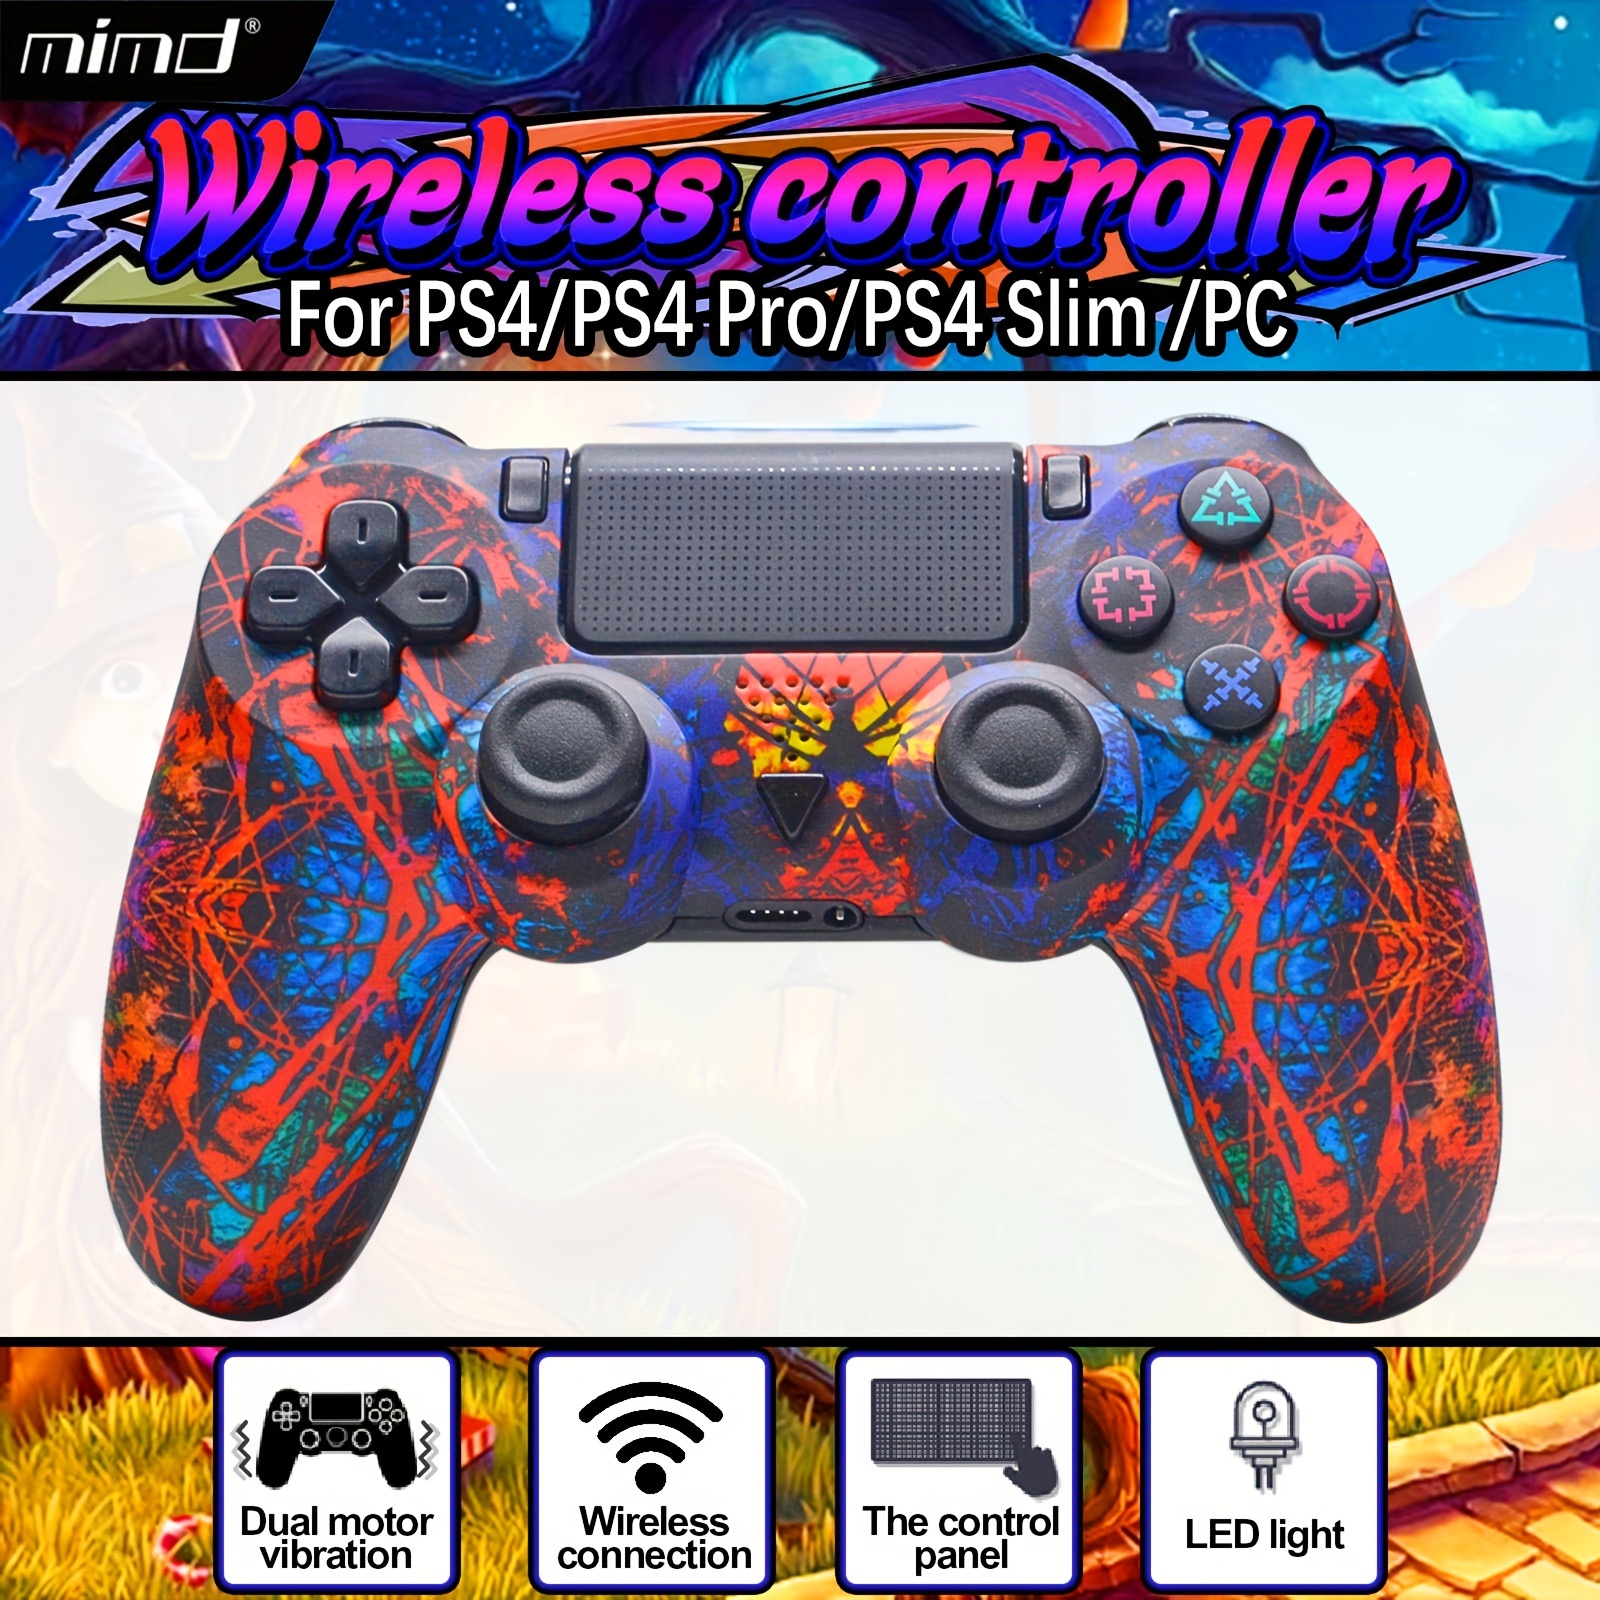 Artsic PS4 Controller, Wireless Pro Game Controller for PlayStation 4  Compatible with PS4/PS4 Slim, Enhanced Dual Vibration/Analog  Joystick/6-Axis